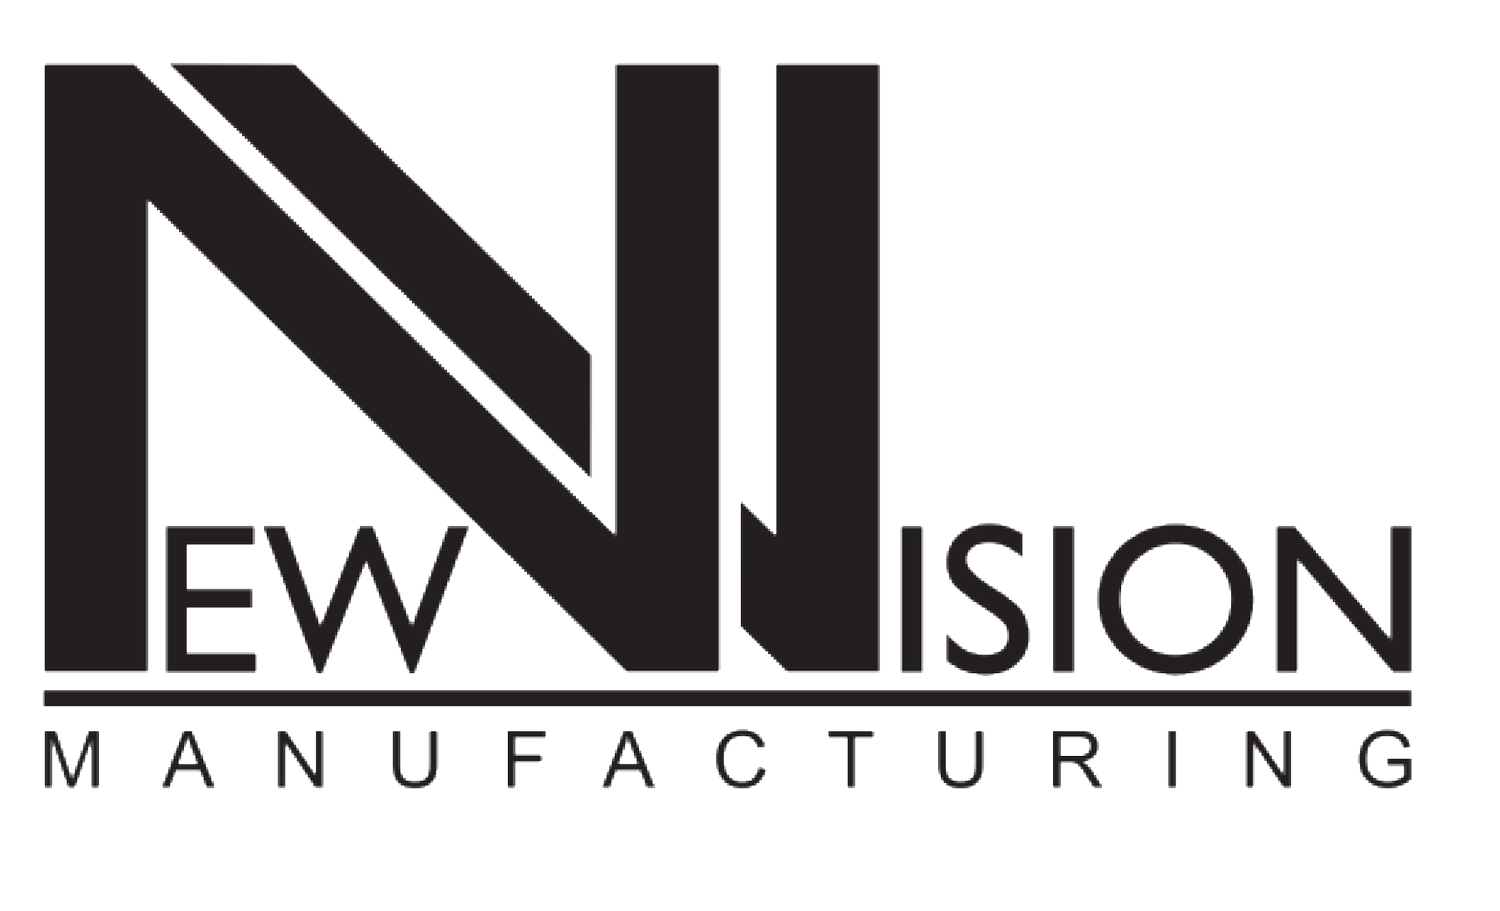 New Vision Manufacturing